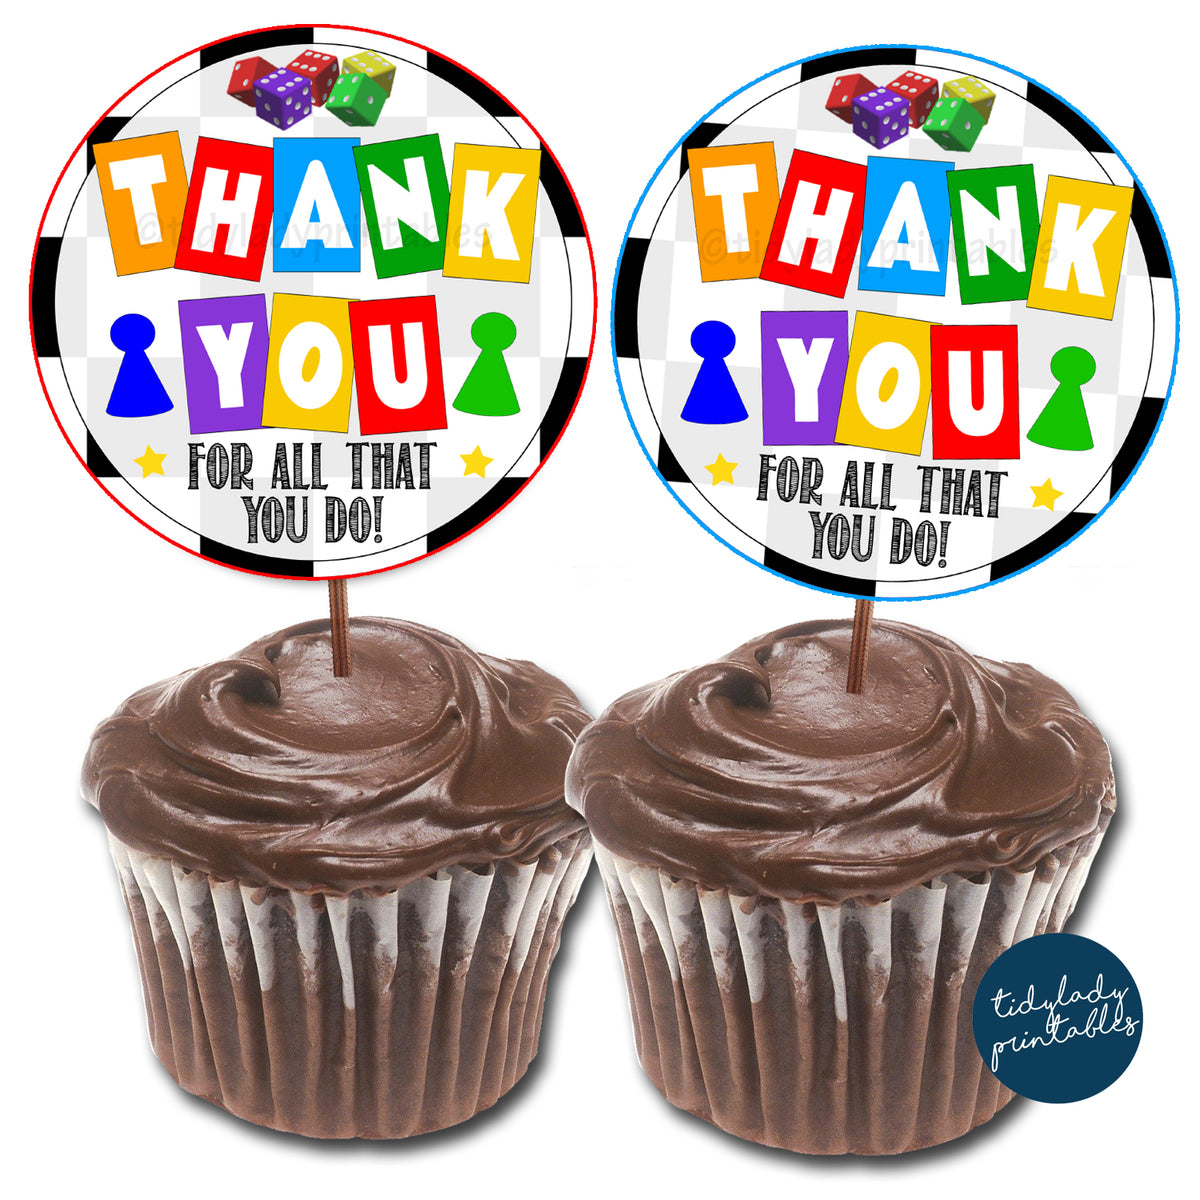 Board Game Theme Appreciation Week Printable Cupcake Toppers – TidyLady